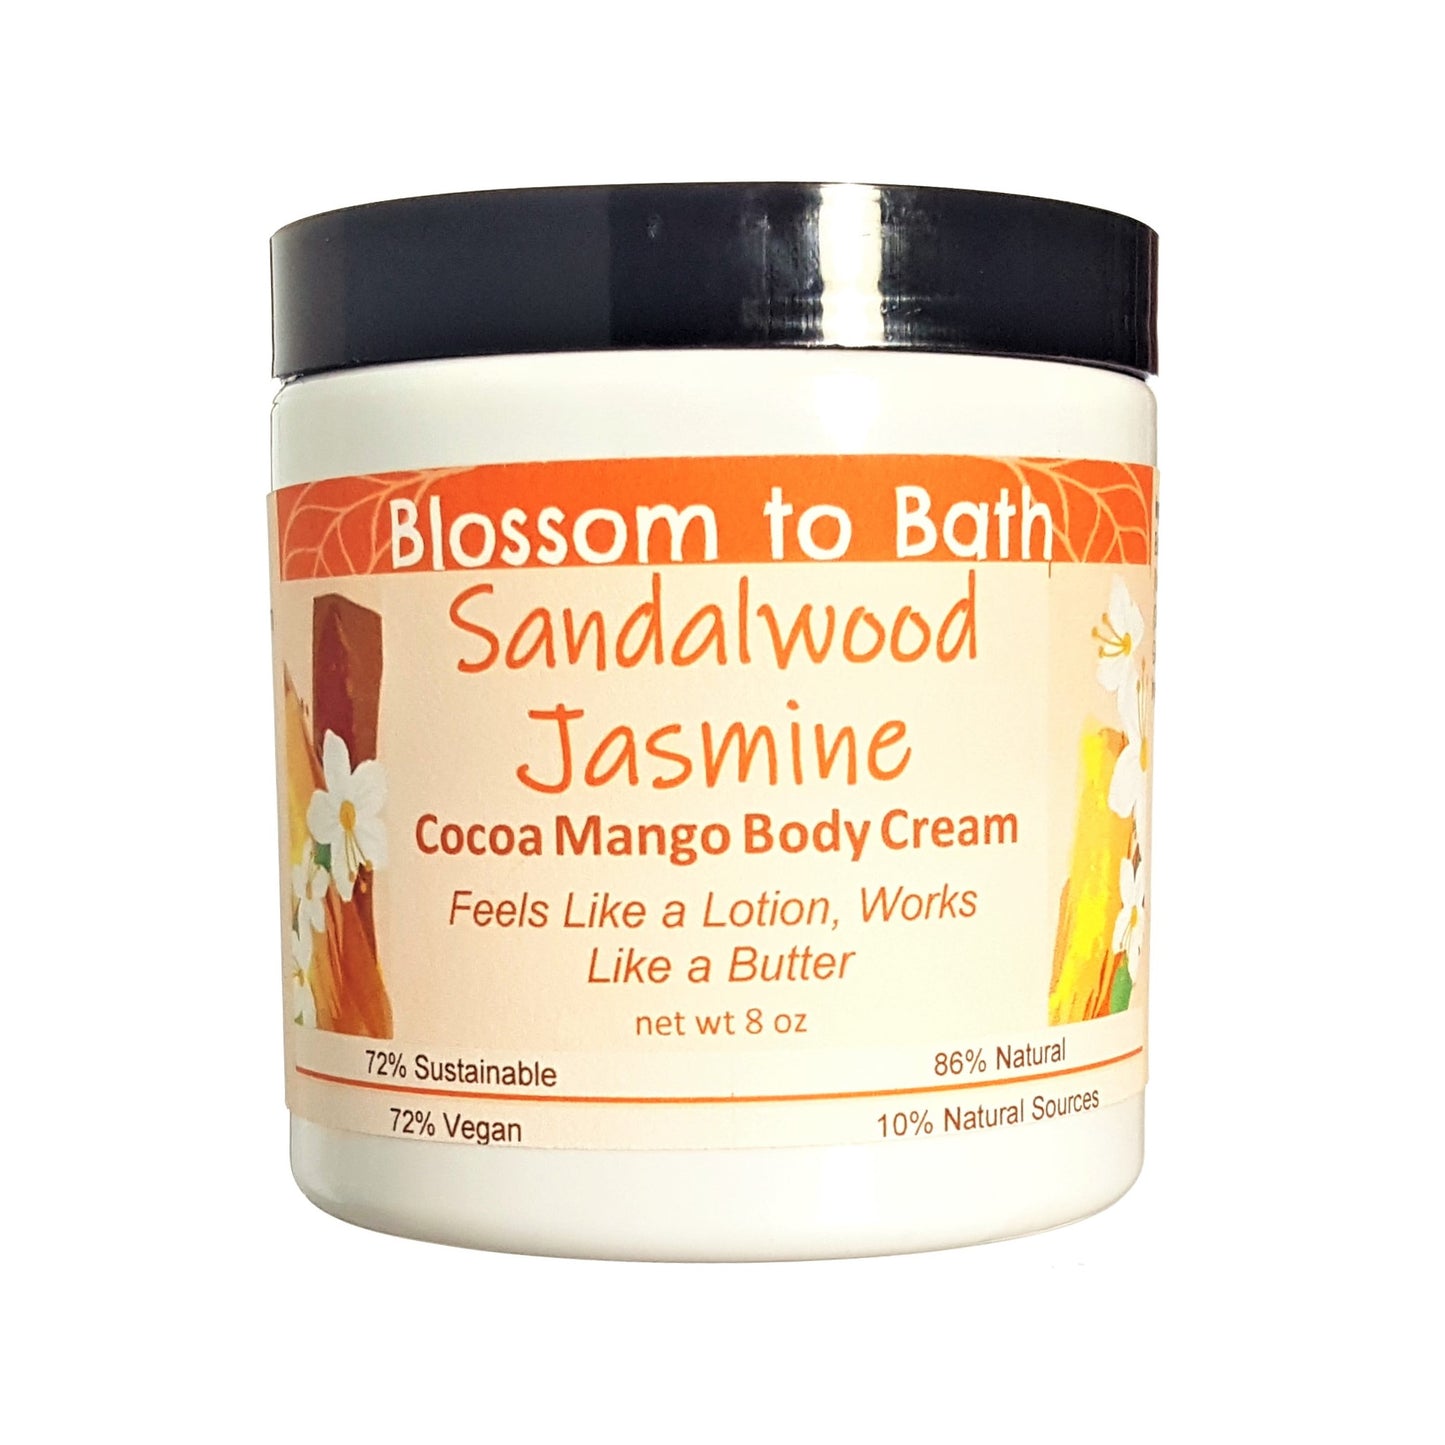 Buy Blossom to Bath Sandalwood Jasmine Cocoa Mango Body Cream from Flowersong Soap Studio.  Rich organic butters luxury soften and moisturize even the roughest skin all day  Floral jasmine meets earthy sandalwood to create a soul stirring blend.